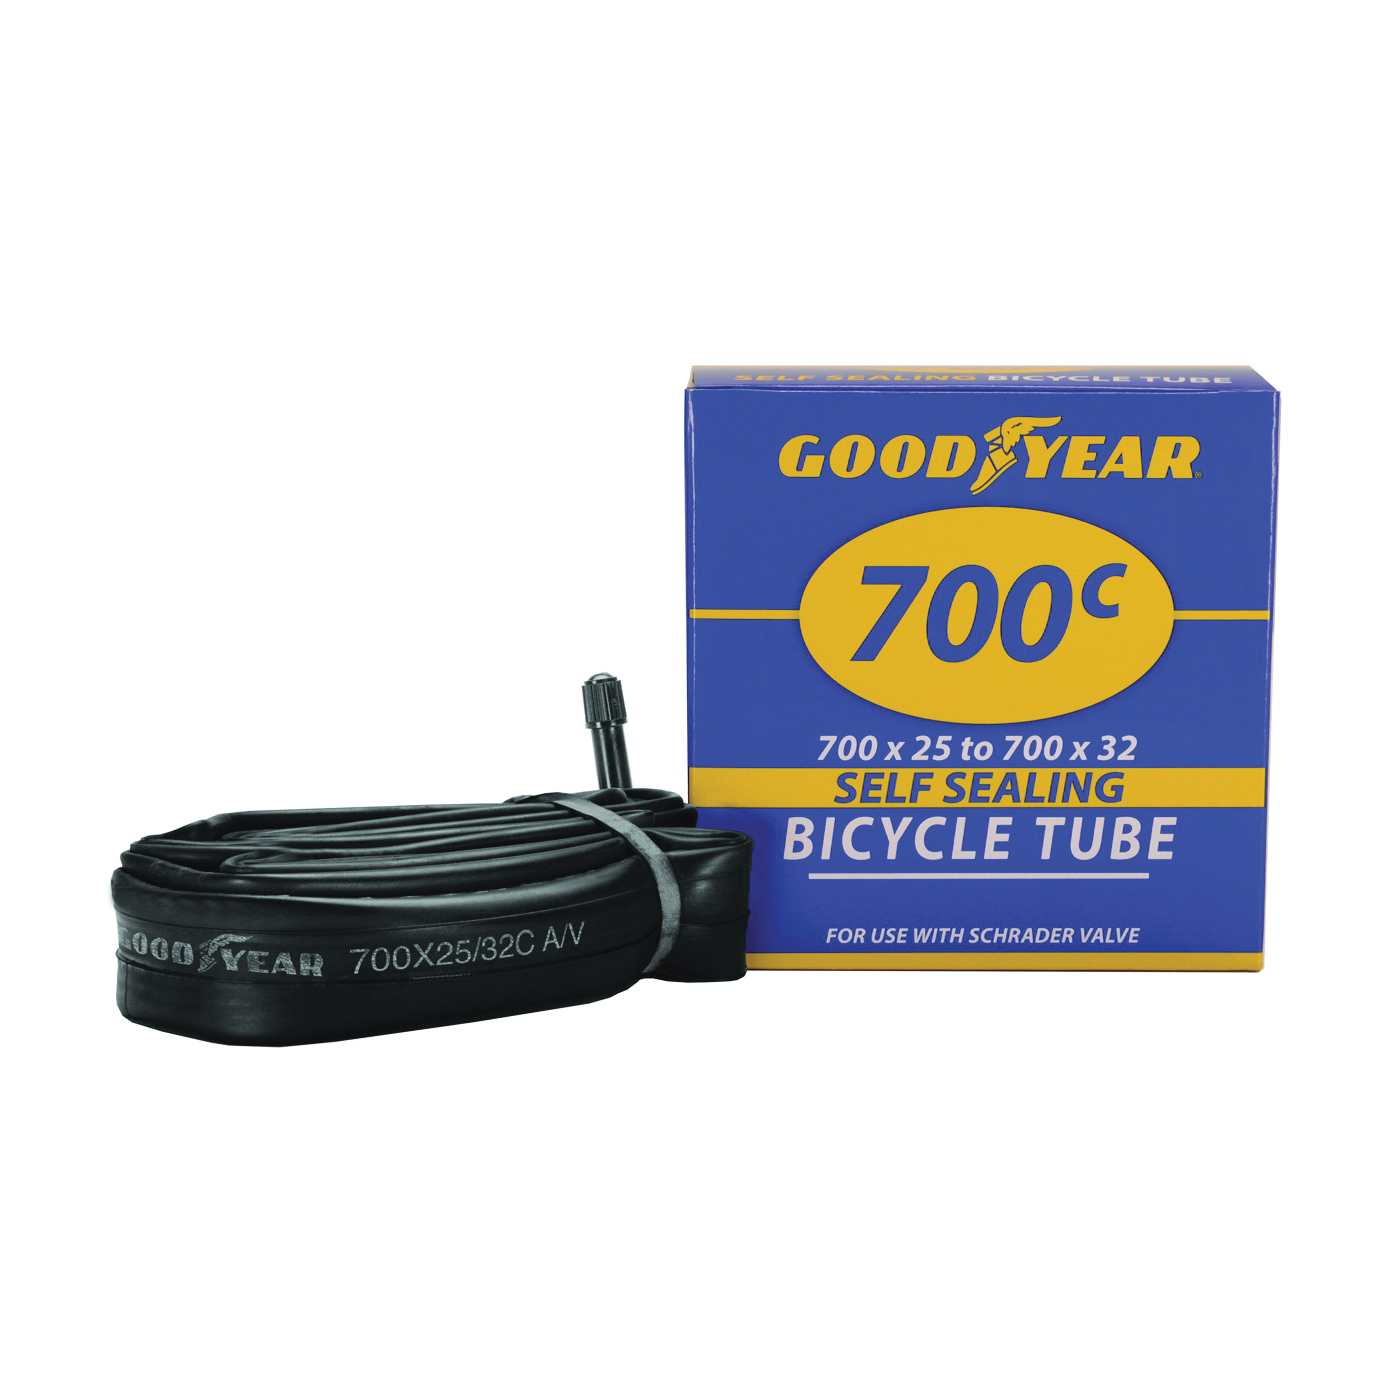 95202 Bicycle Tube, Self-Sealing, For: 700c x 25 to 32 in W Bicycle Tires